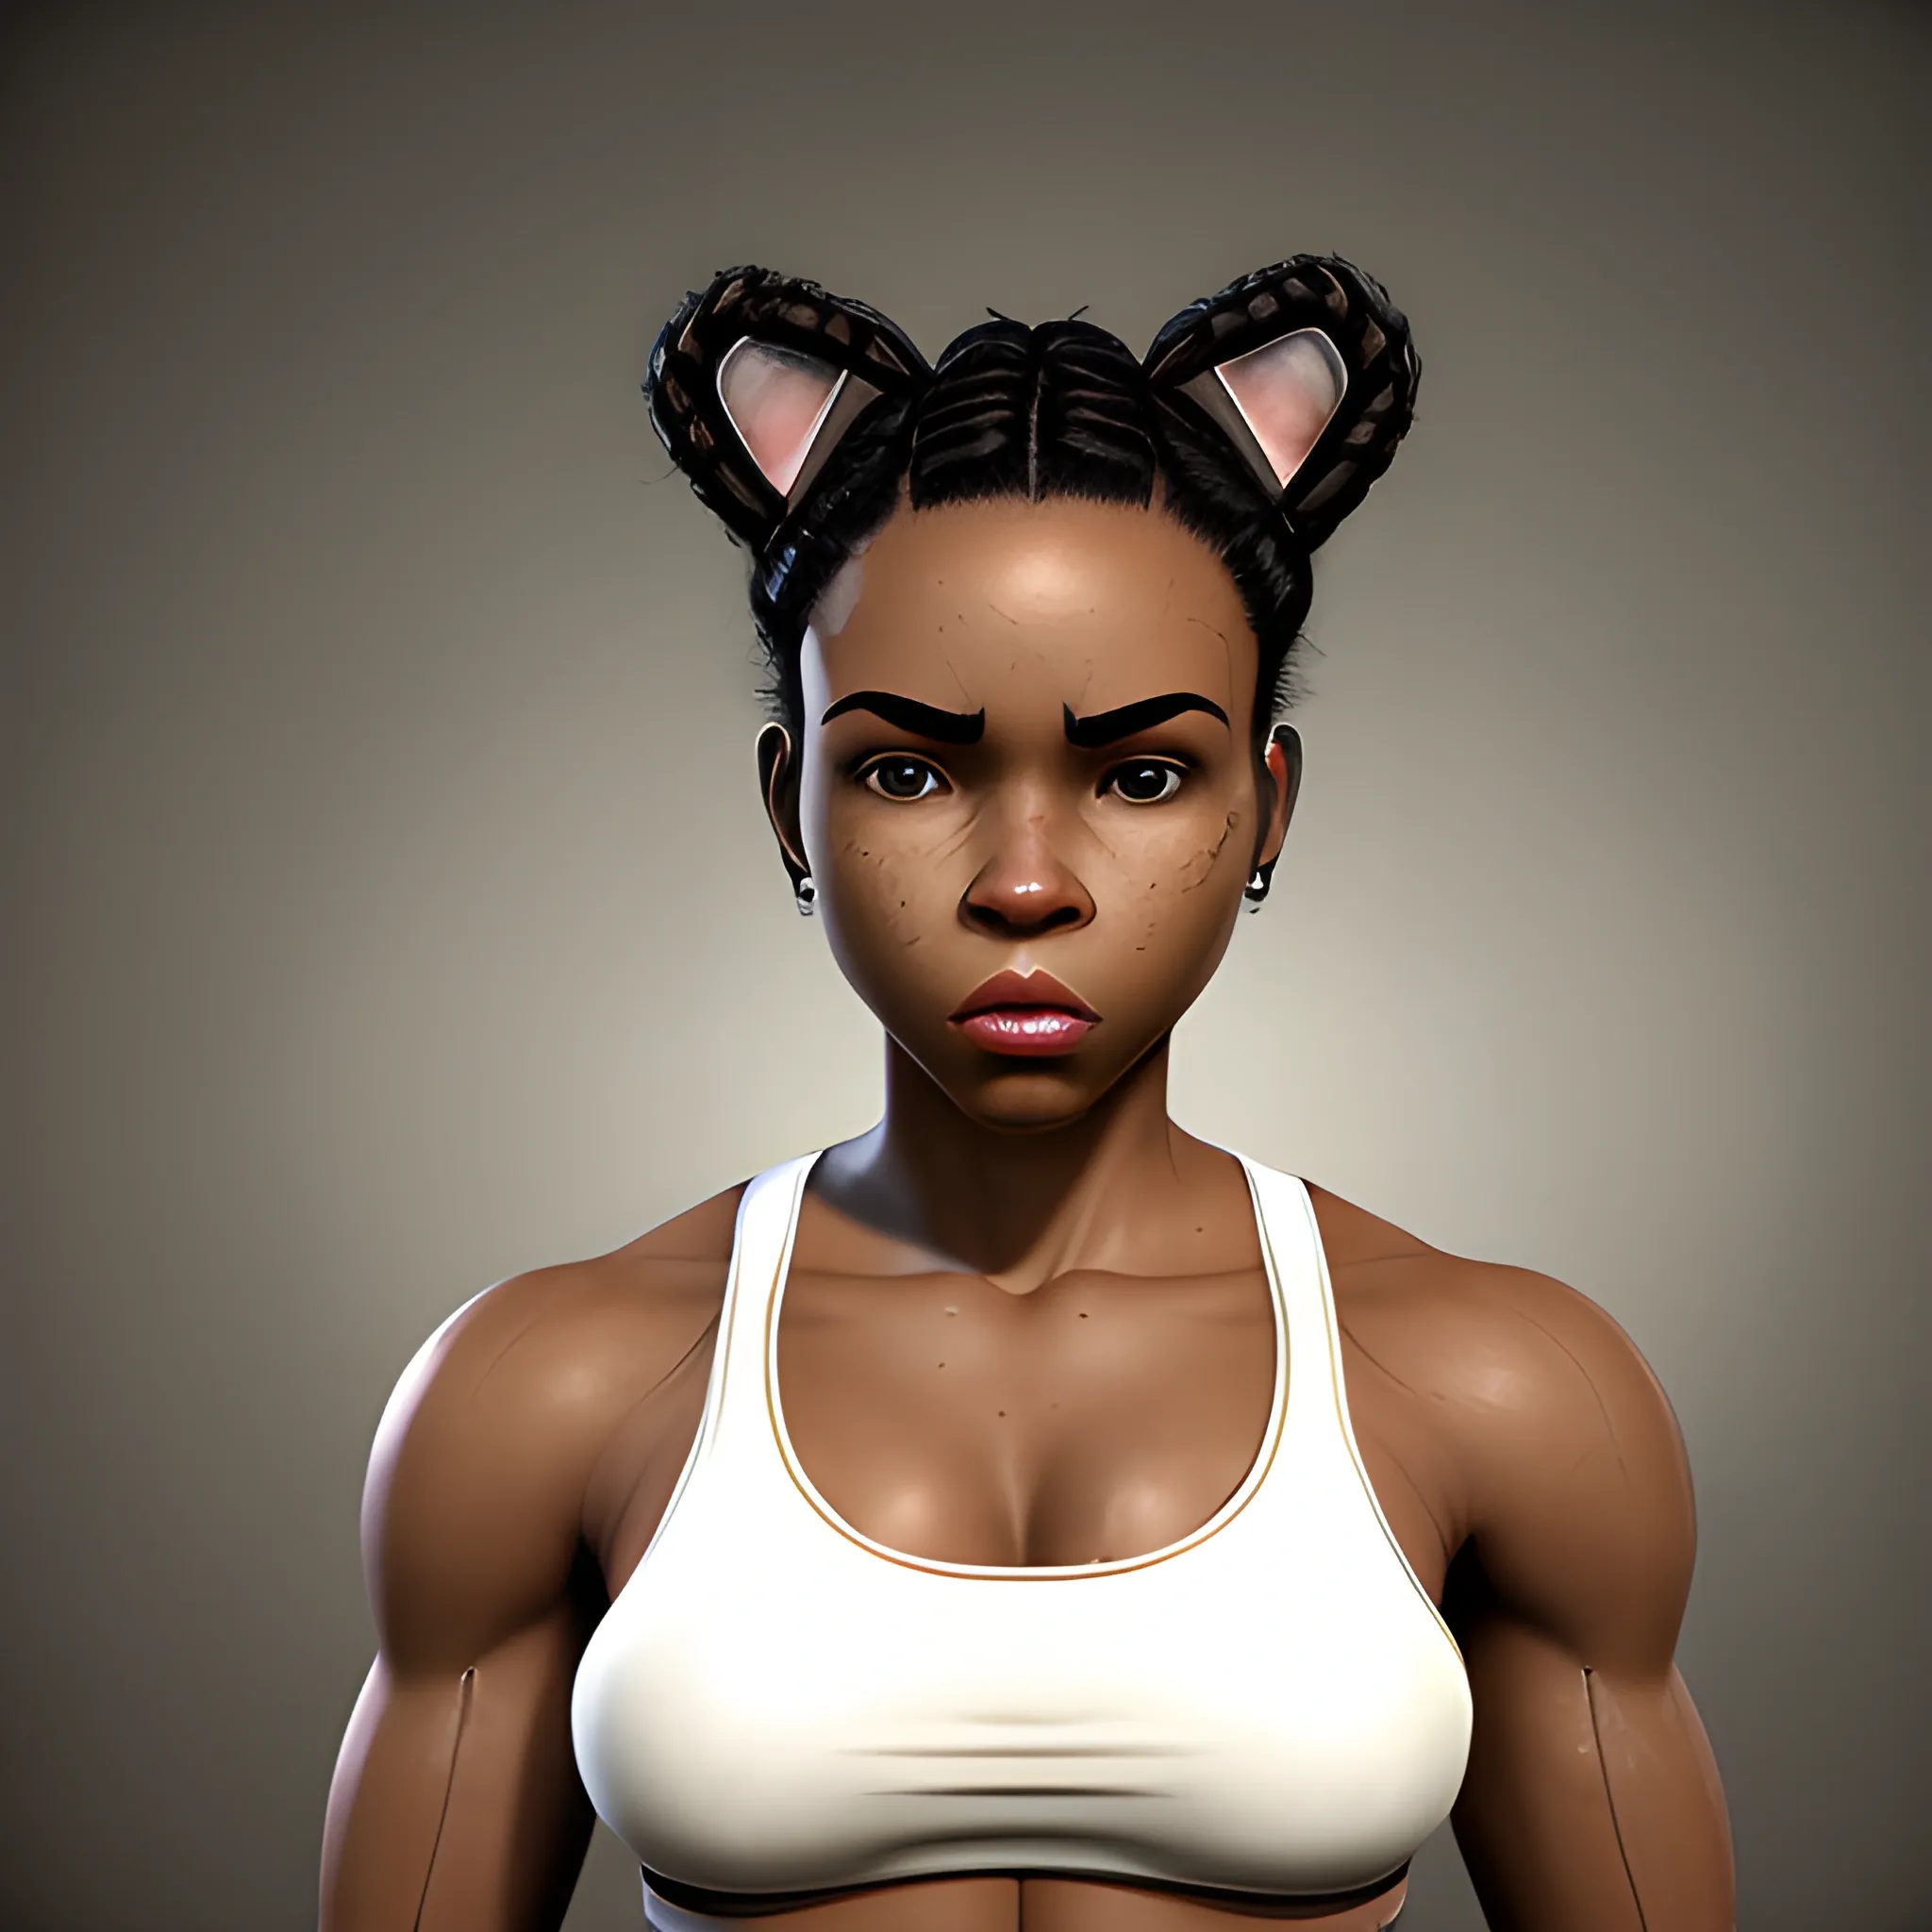 In the style of fallout 1, (masterpiece), (portrait photography), (portrait of an adult African-American feminine male), no makeup, flat chested, white sports bra, bun hairstyle, black curly hair, black hair, brown eyes, sloped shoulders, fit body, full lips, strong jaw, round button nose, cat ears